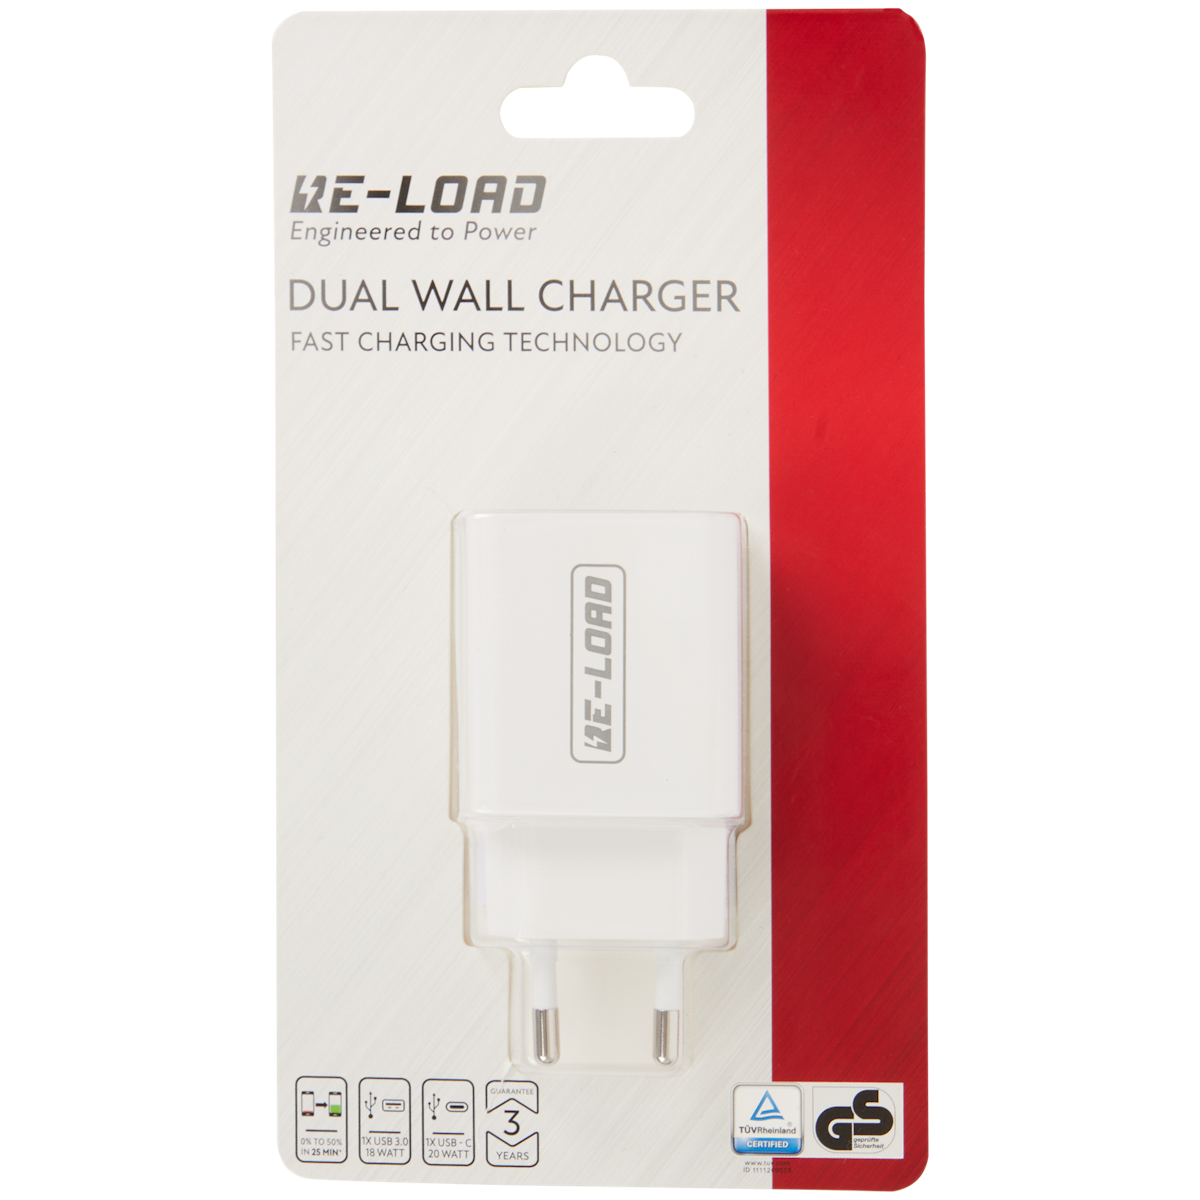 Chargeur rapide double Re-load